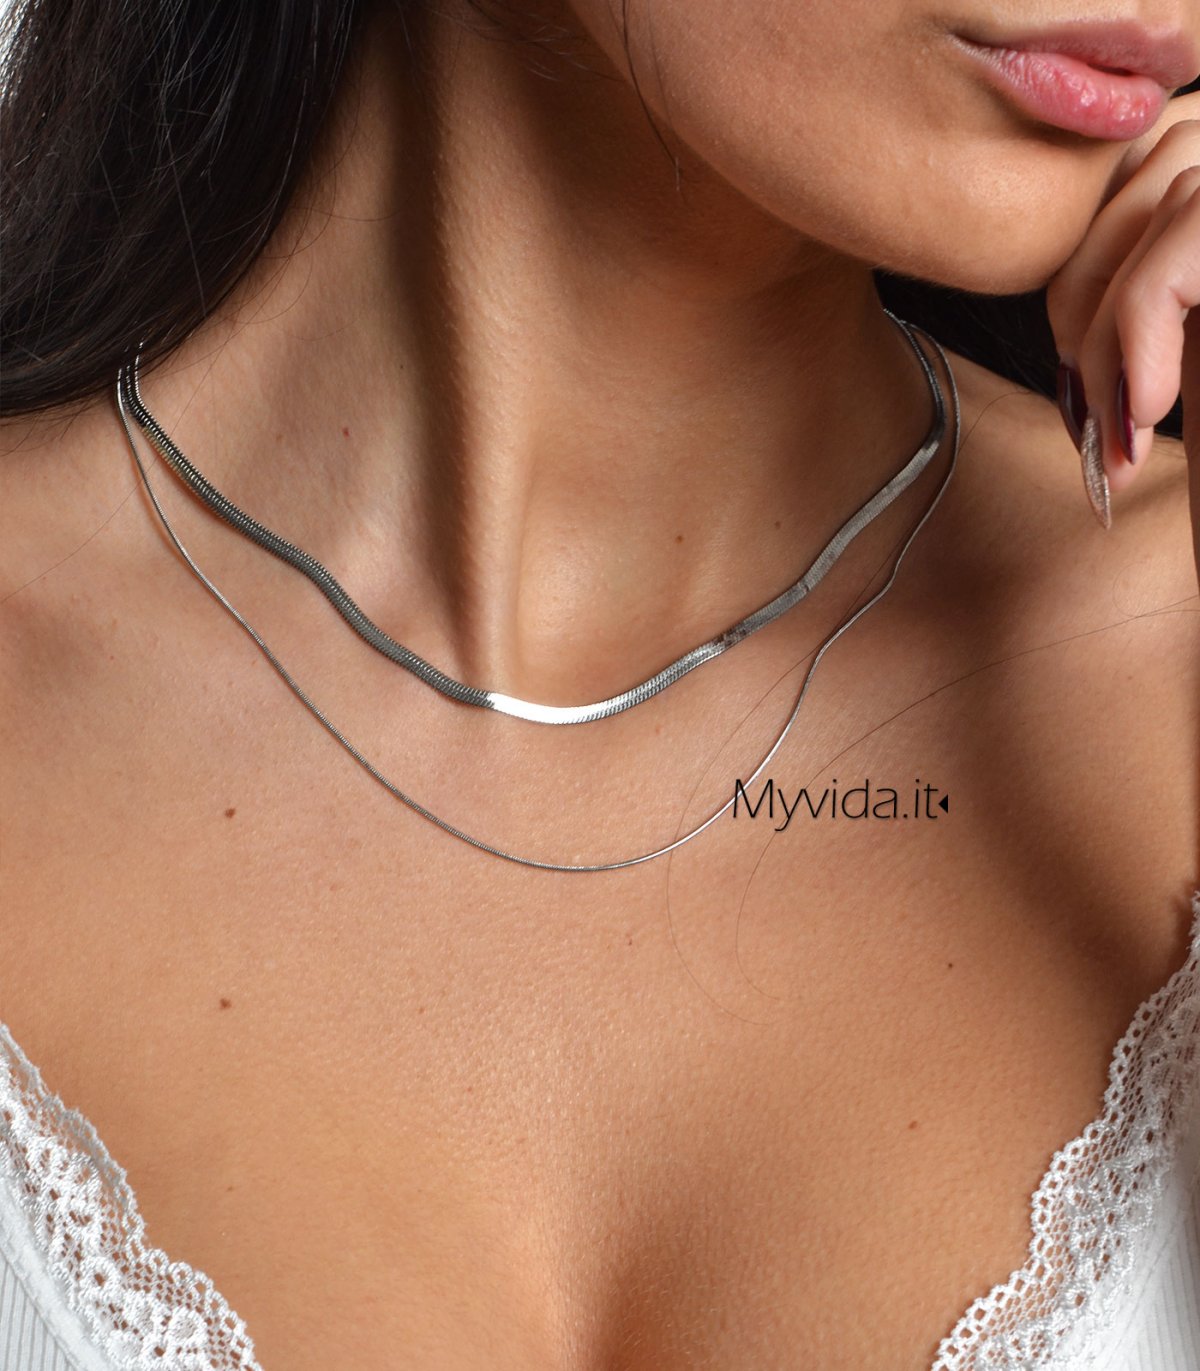 https://www.myvida.it/files/styles/zoom/public/images/products/Collana%20collare%20donna%20girocollo%20doppio/collana_collare_donna_girocollo_doppio.jpg?itok=FPzlV8Js